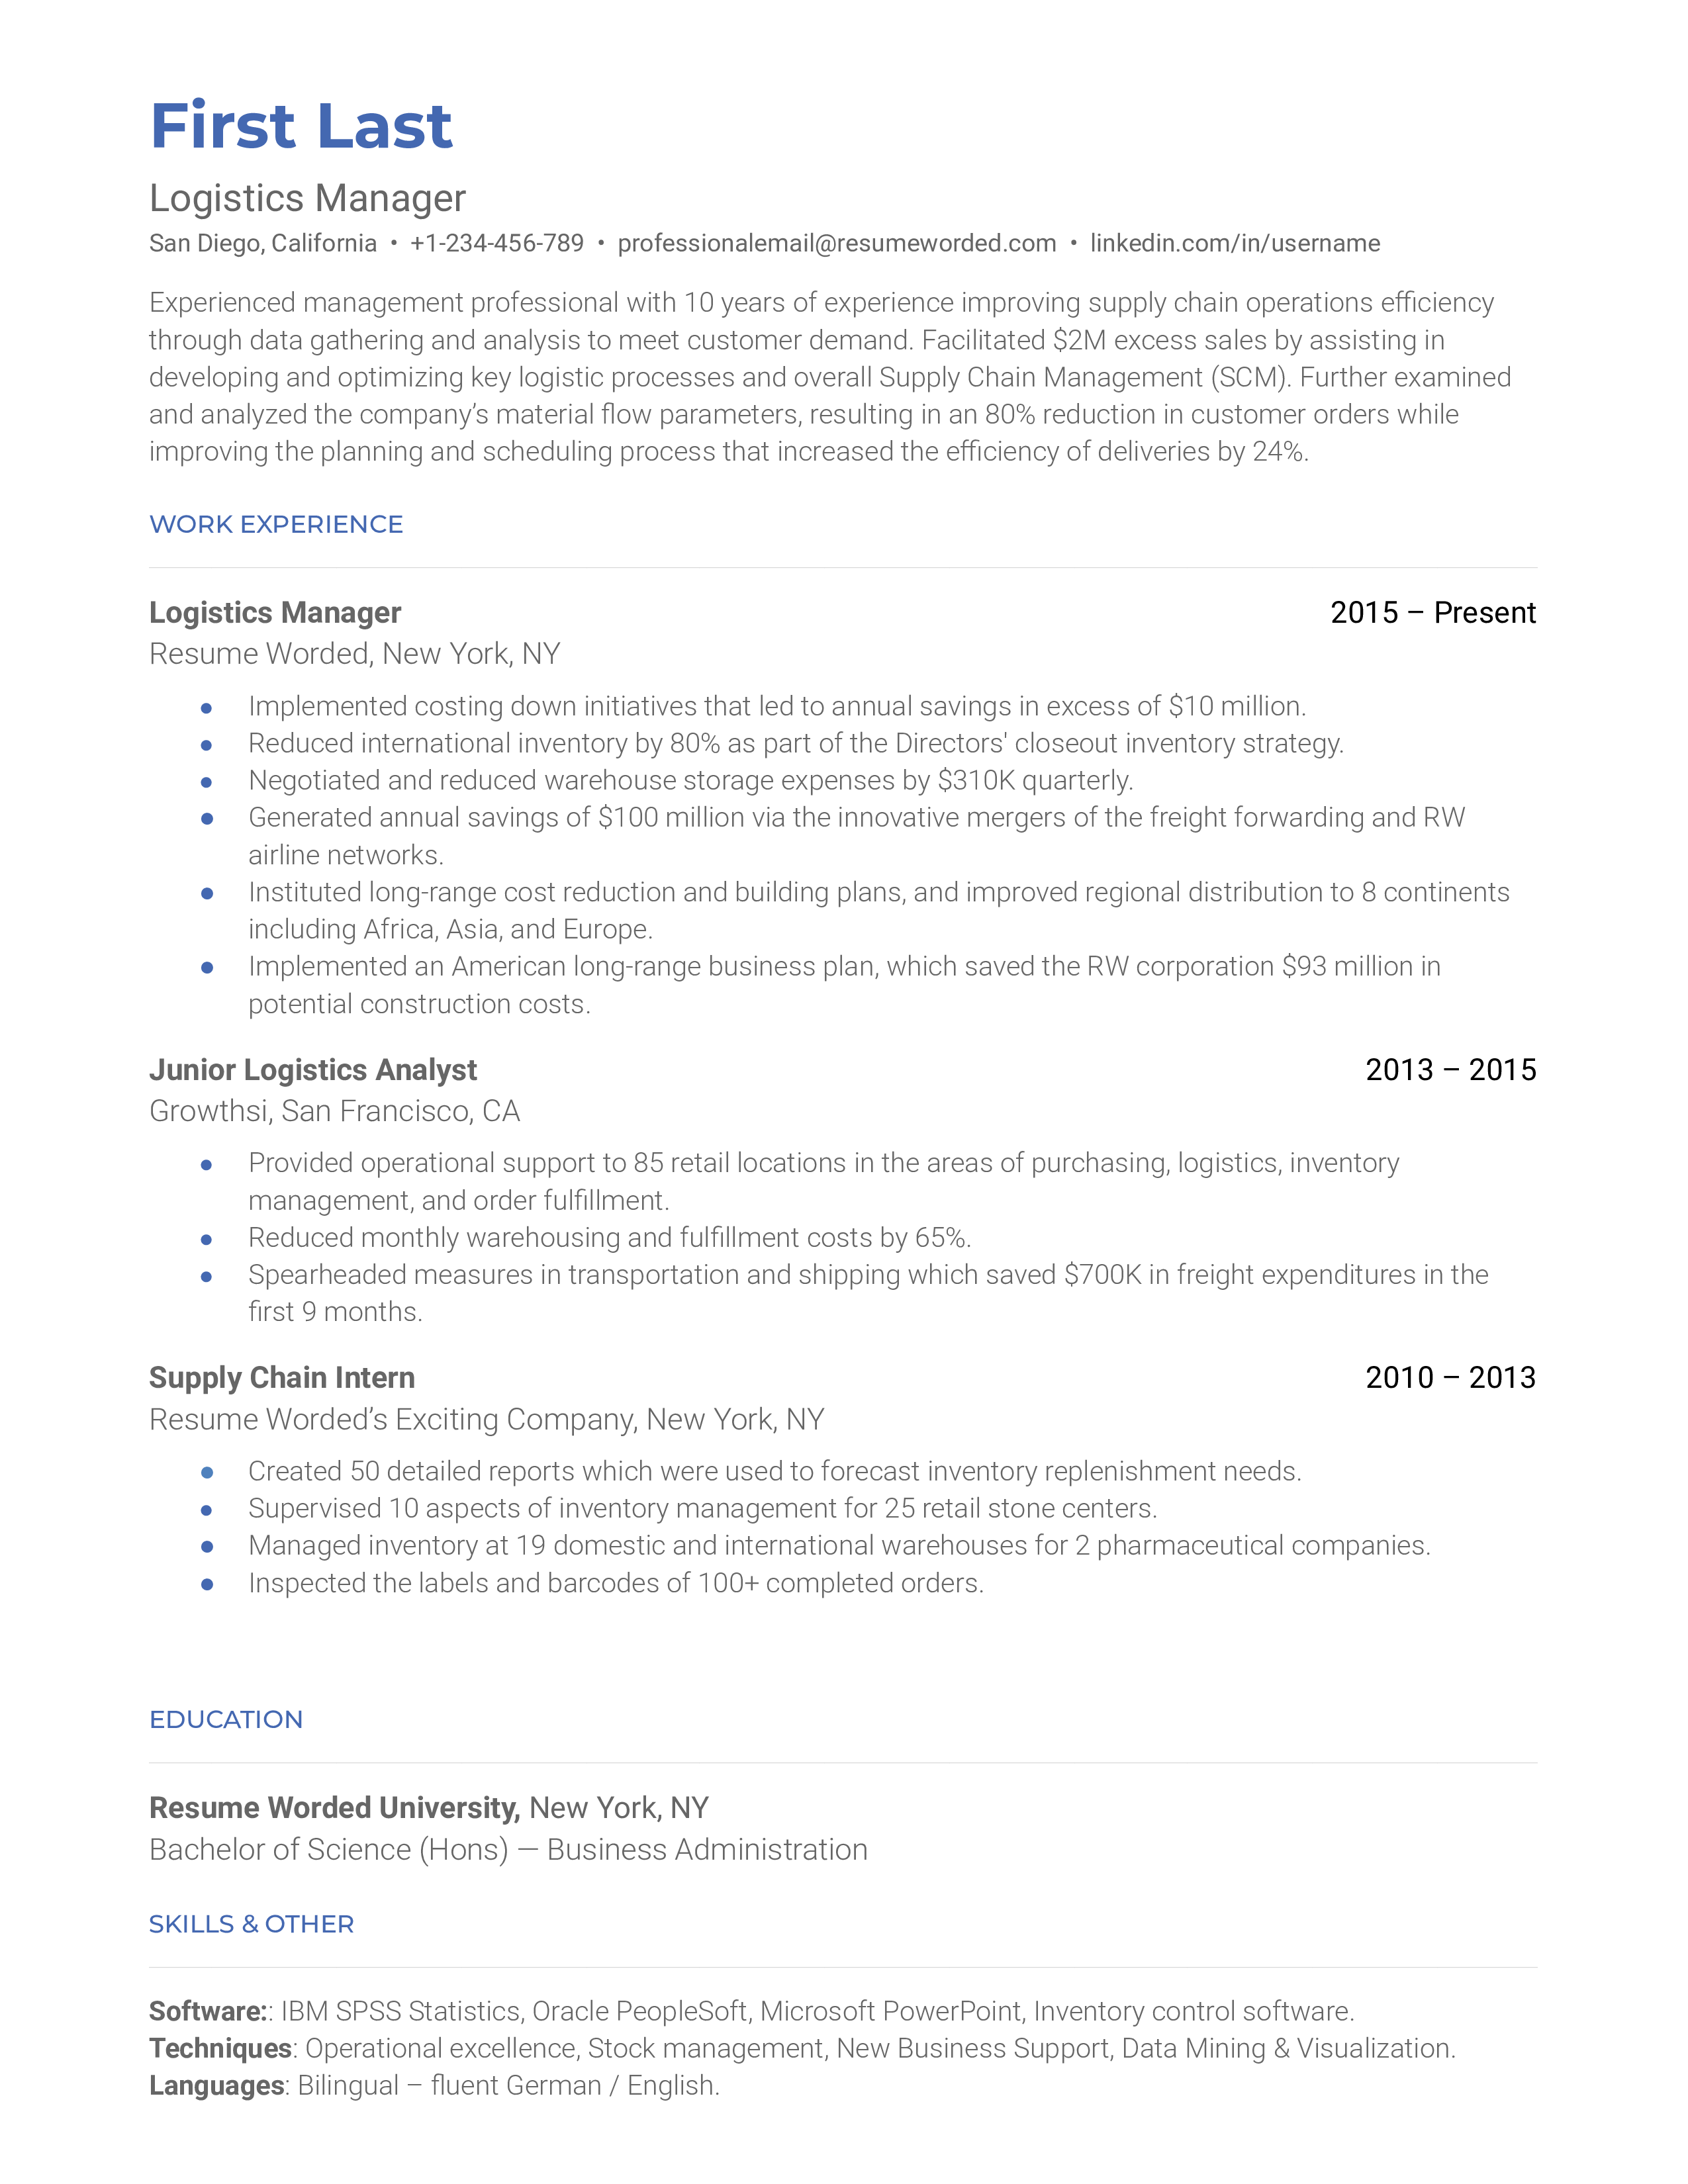 A logistics manager resume that uses logistics-related action verbs